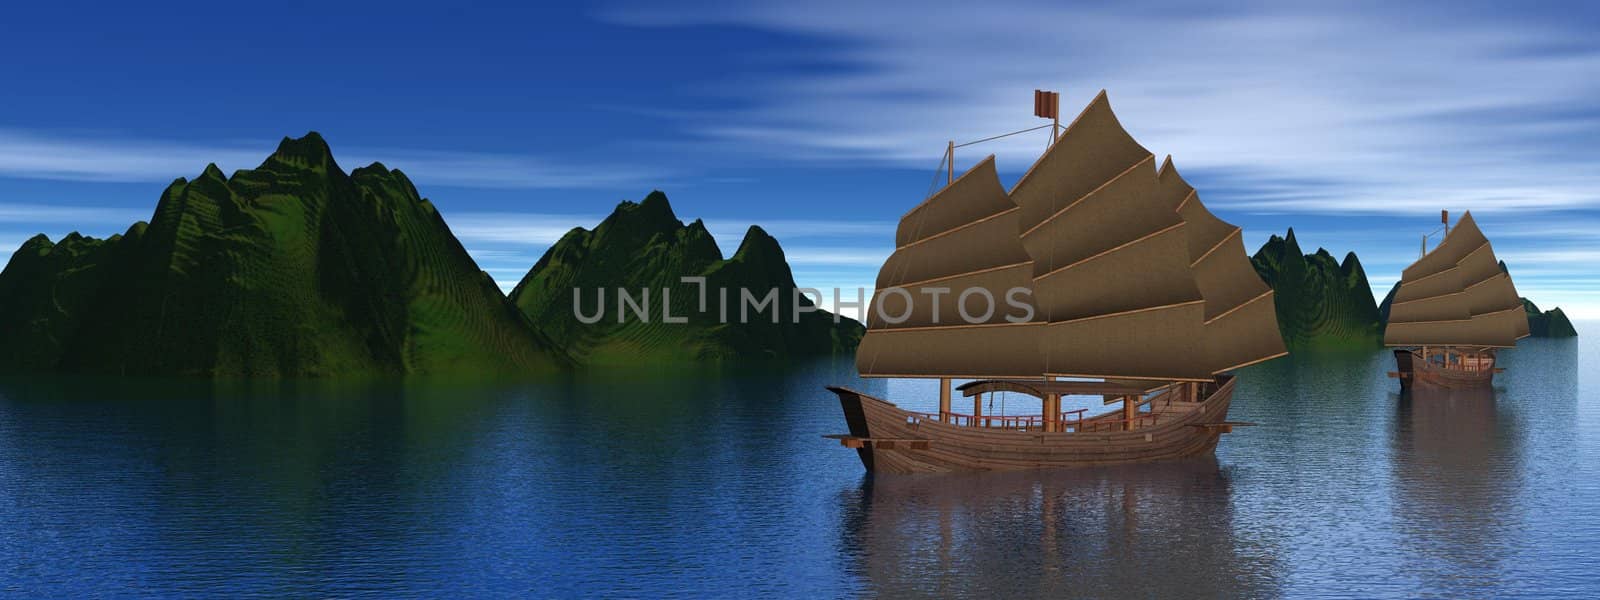 Two oriental junk boats on water next to mountains by dawn